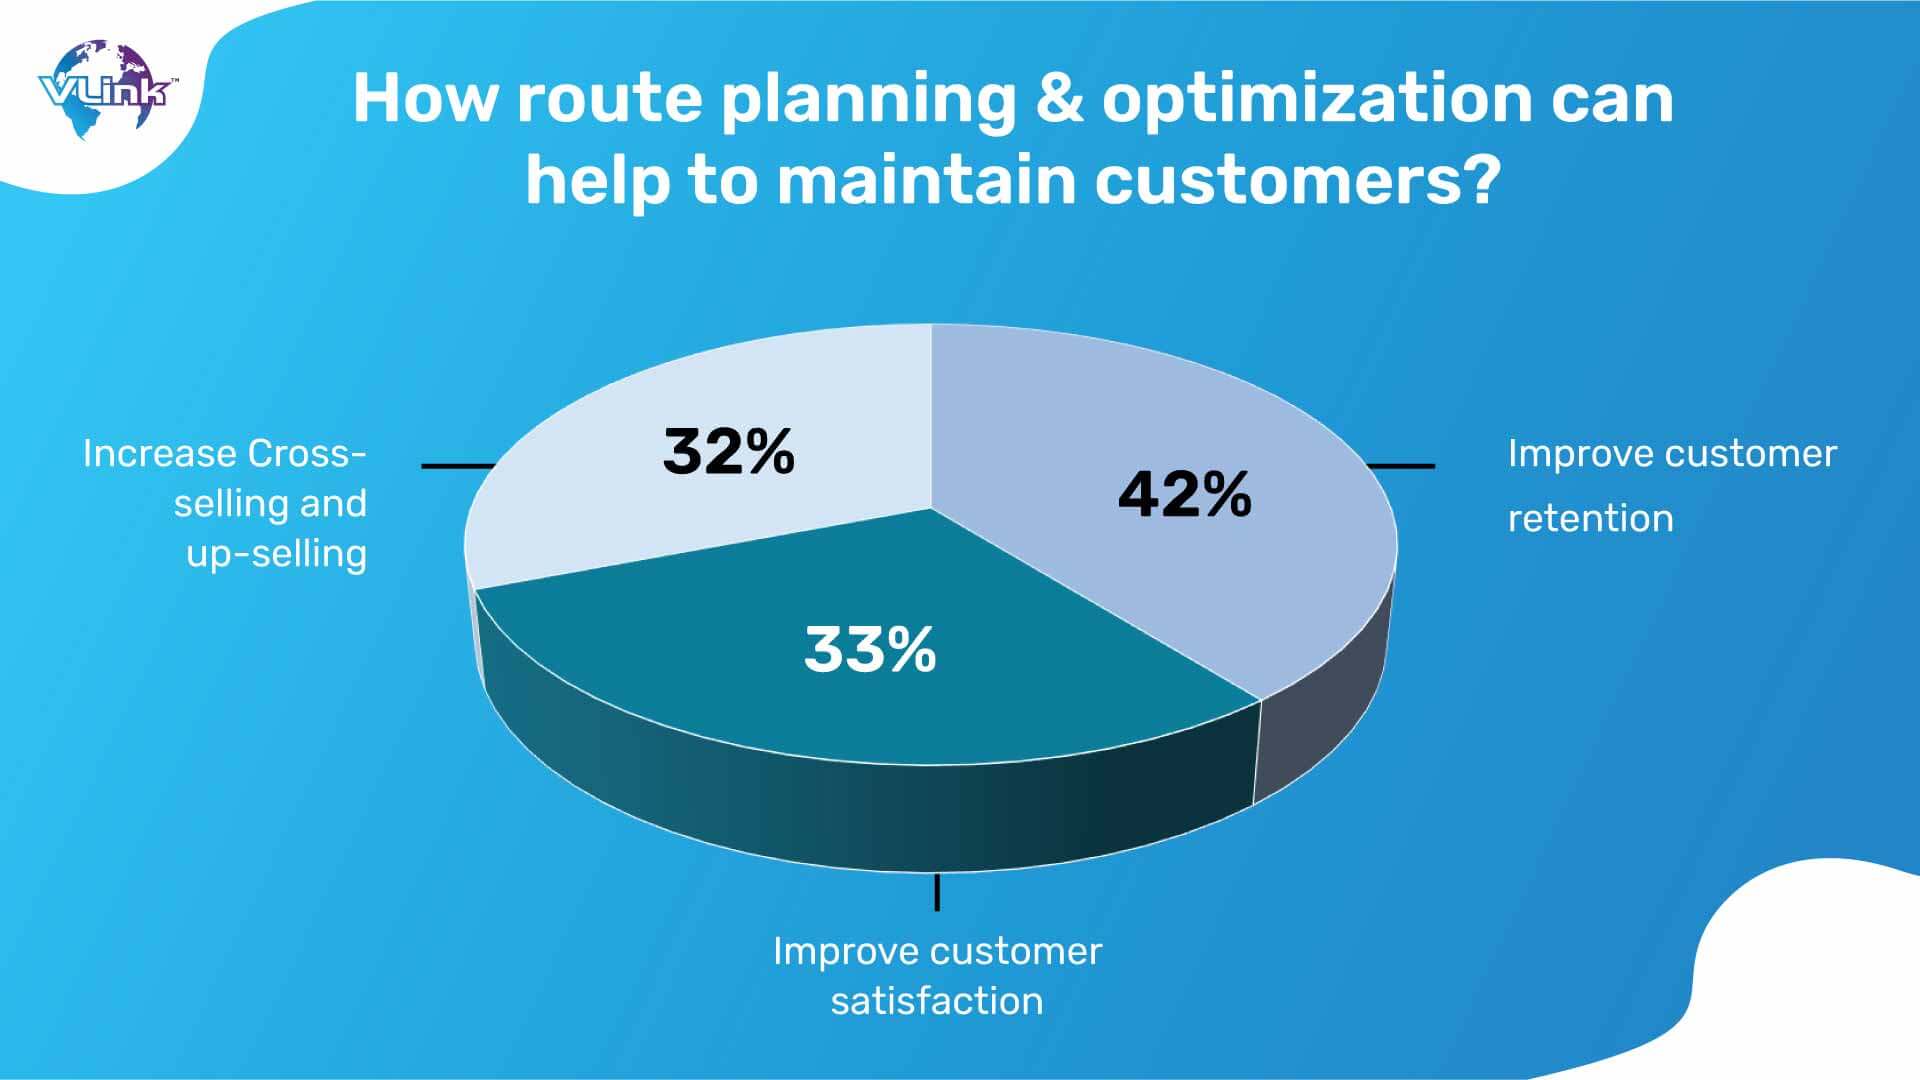 How route planning & optimization can help to maintain customers